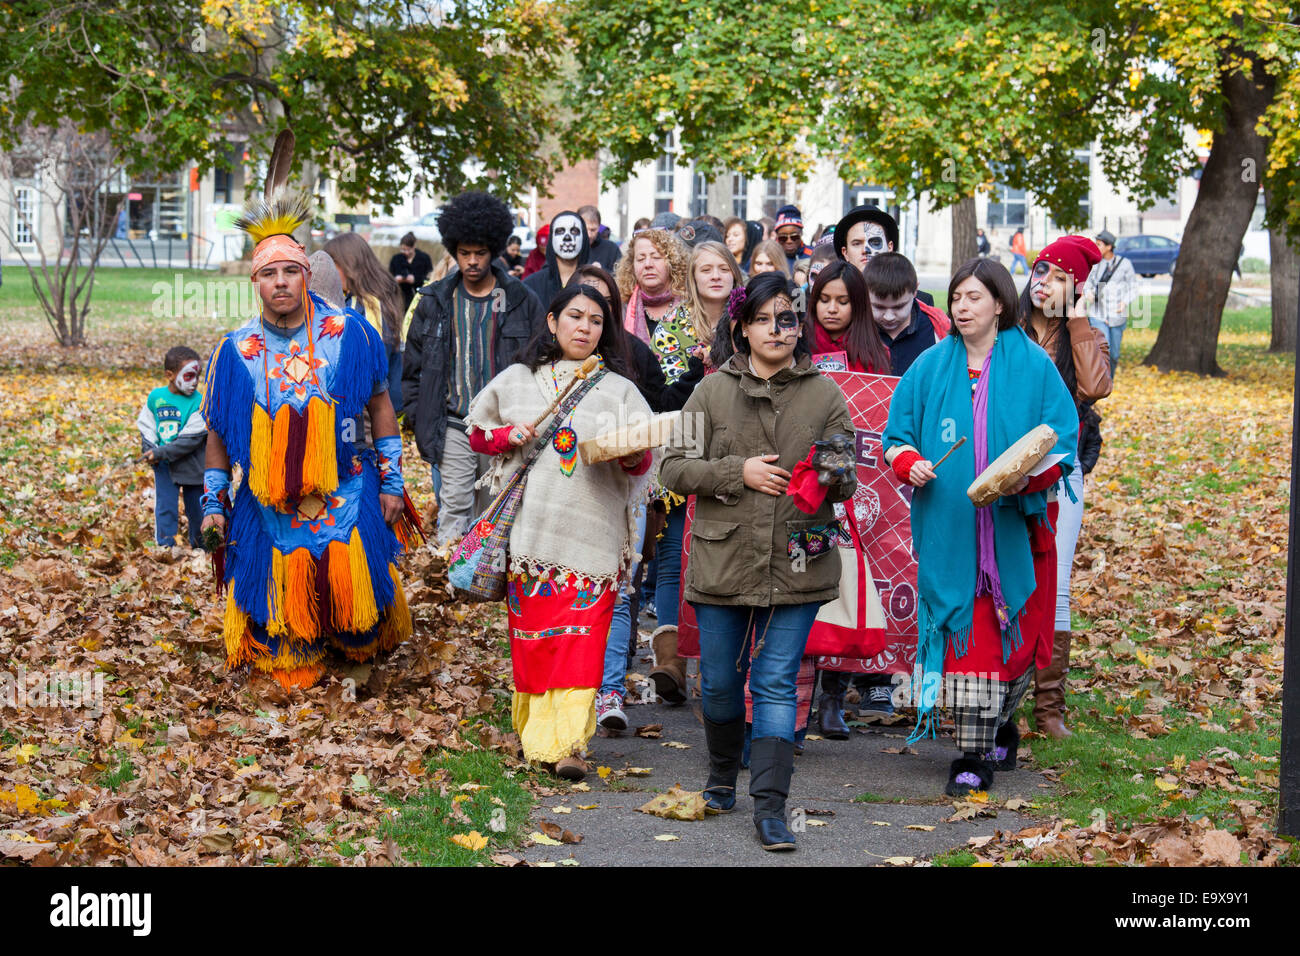 Detroit, Michigan - Residents of Detroit's Mexican-American community celebrate the Day of the Dead. Stock Photo